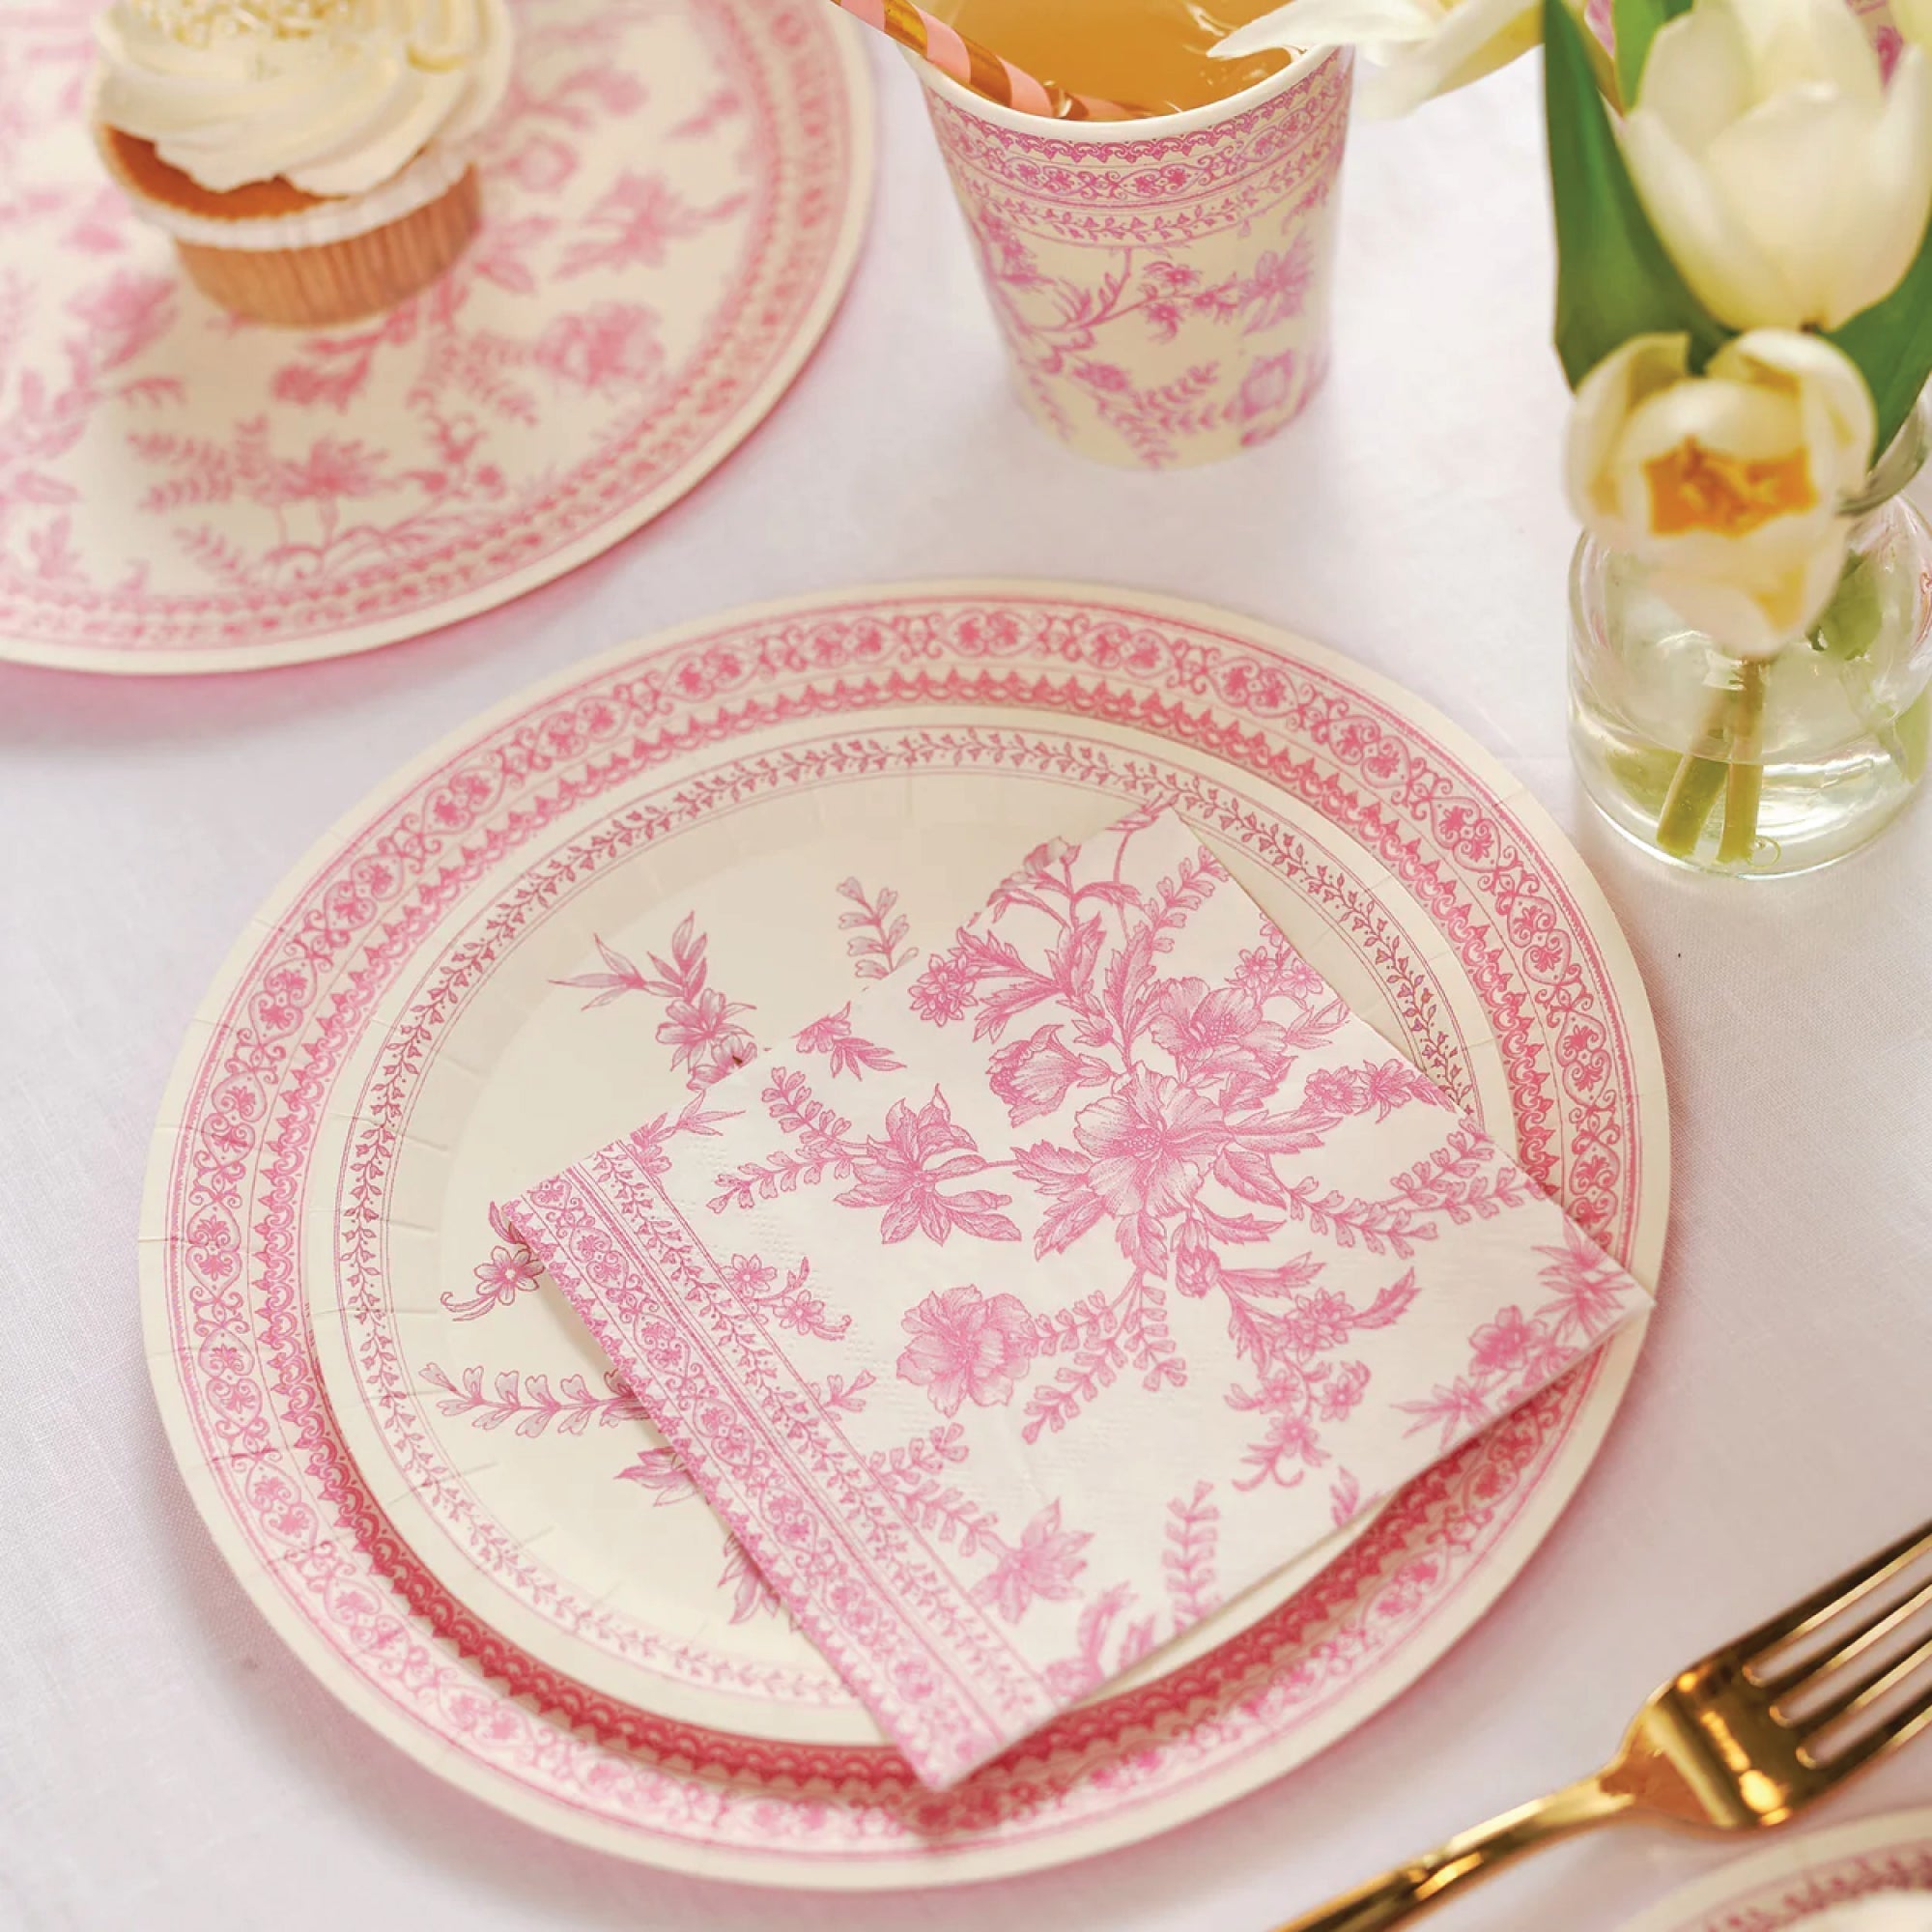 Pink Toile Dessert Napkins 25ct | The Party Darling